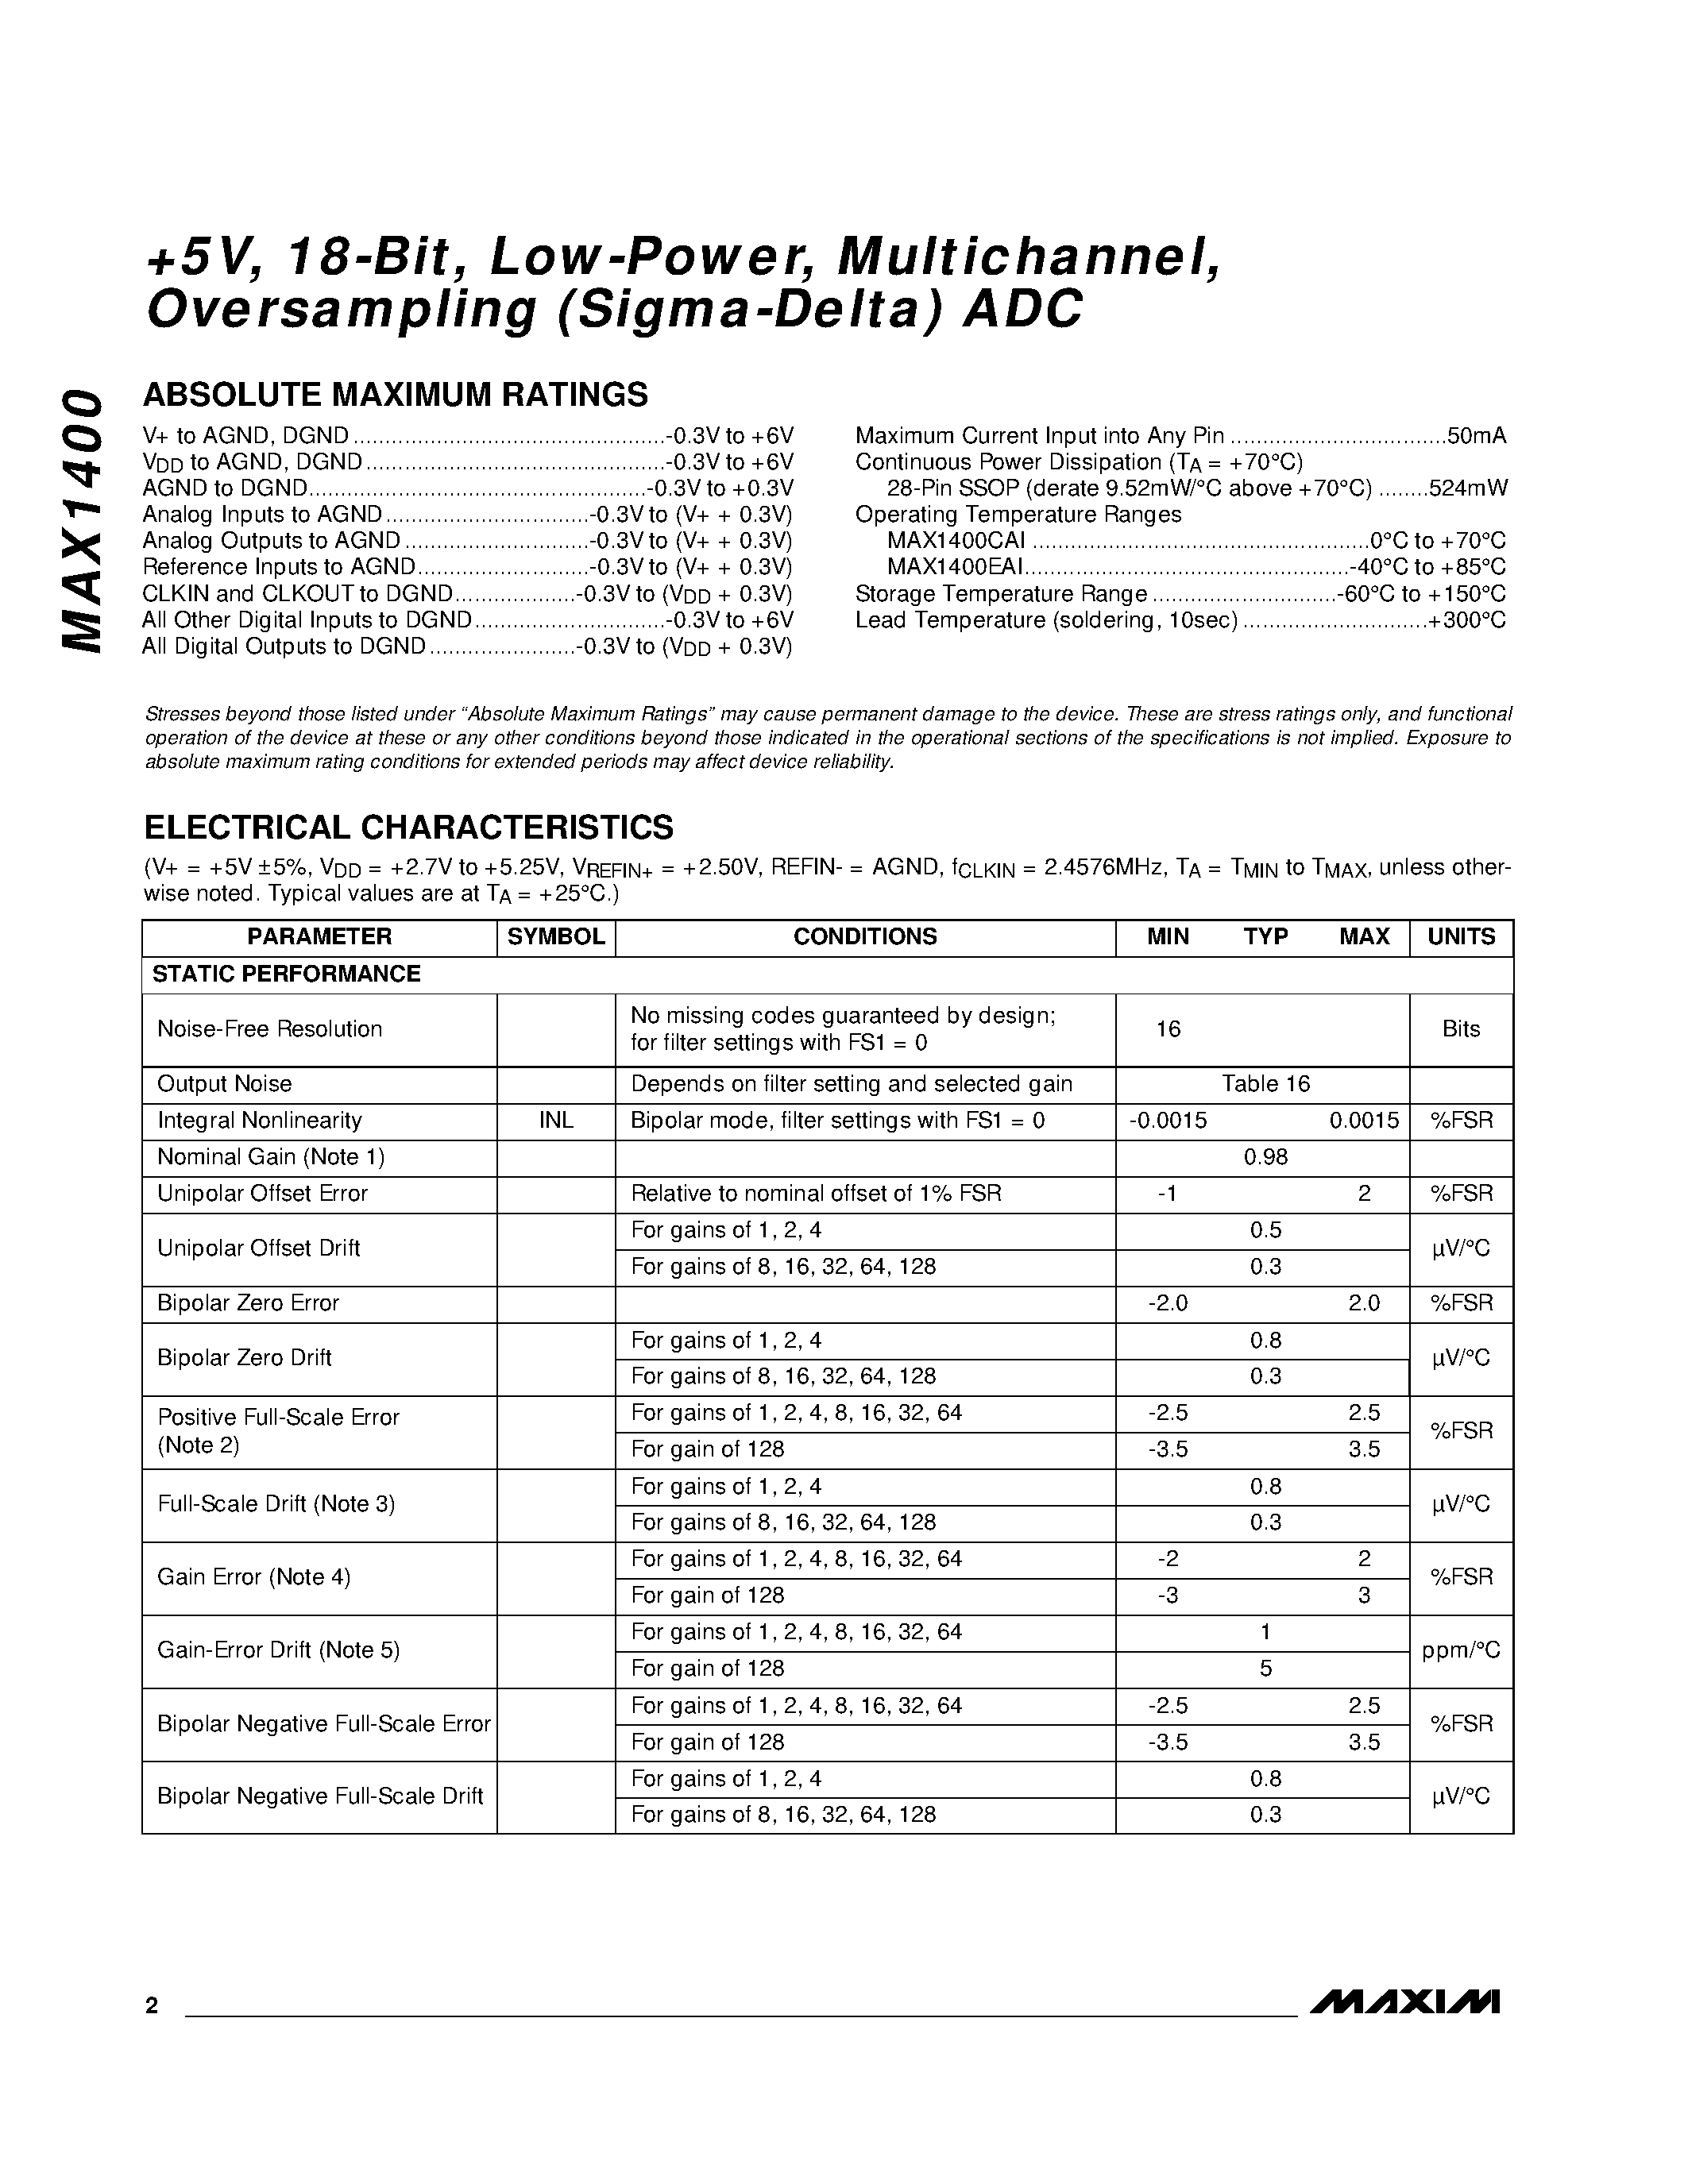 Datasheet MAX1400 - %V / 18-Bit / Low-Power / Multichannel / Oversampling Sigma-Delta ADC page 2